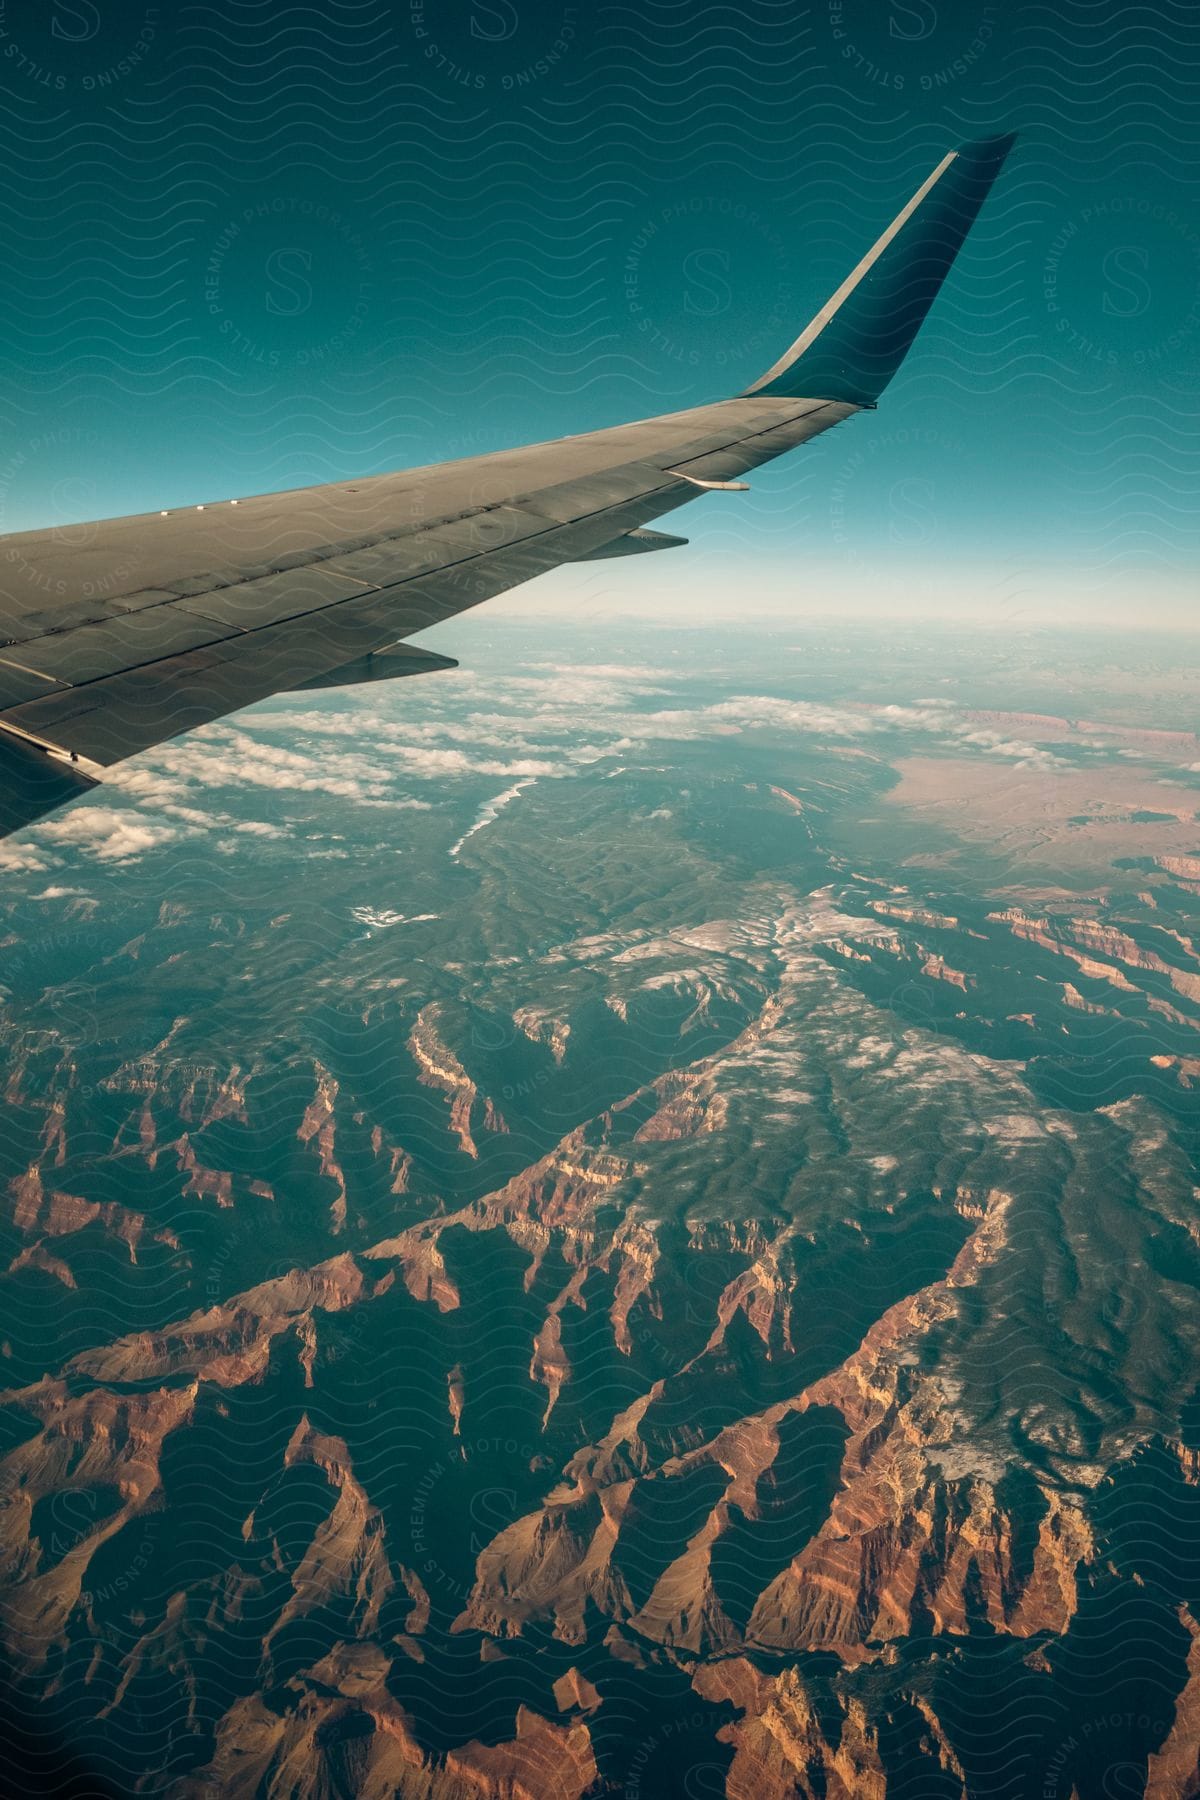 A mountain range is seen with a plane wing in the foreground